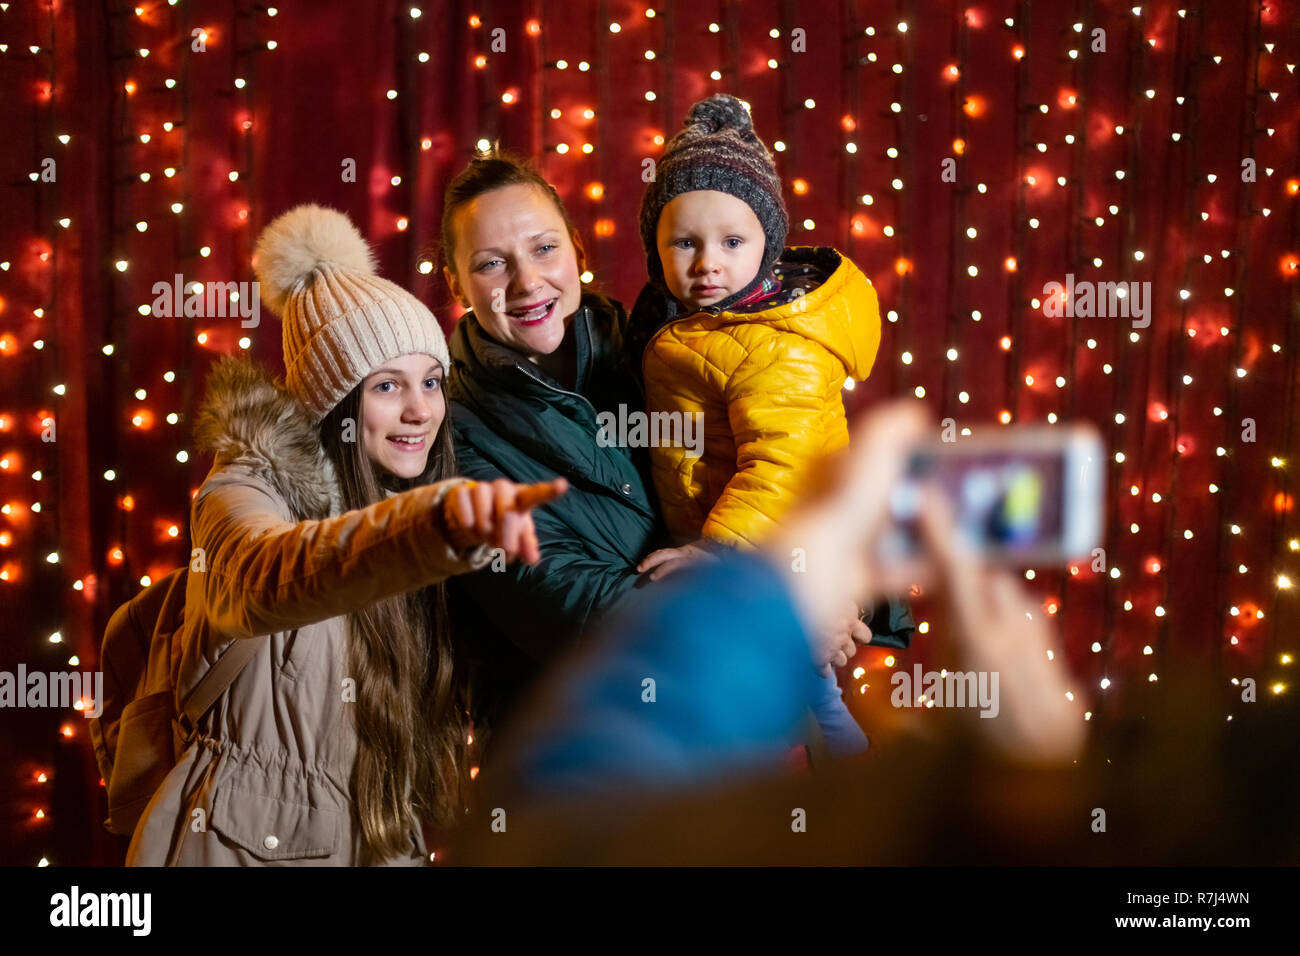 Father taking photo of family at Christmas market on the night. Stock Photo